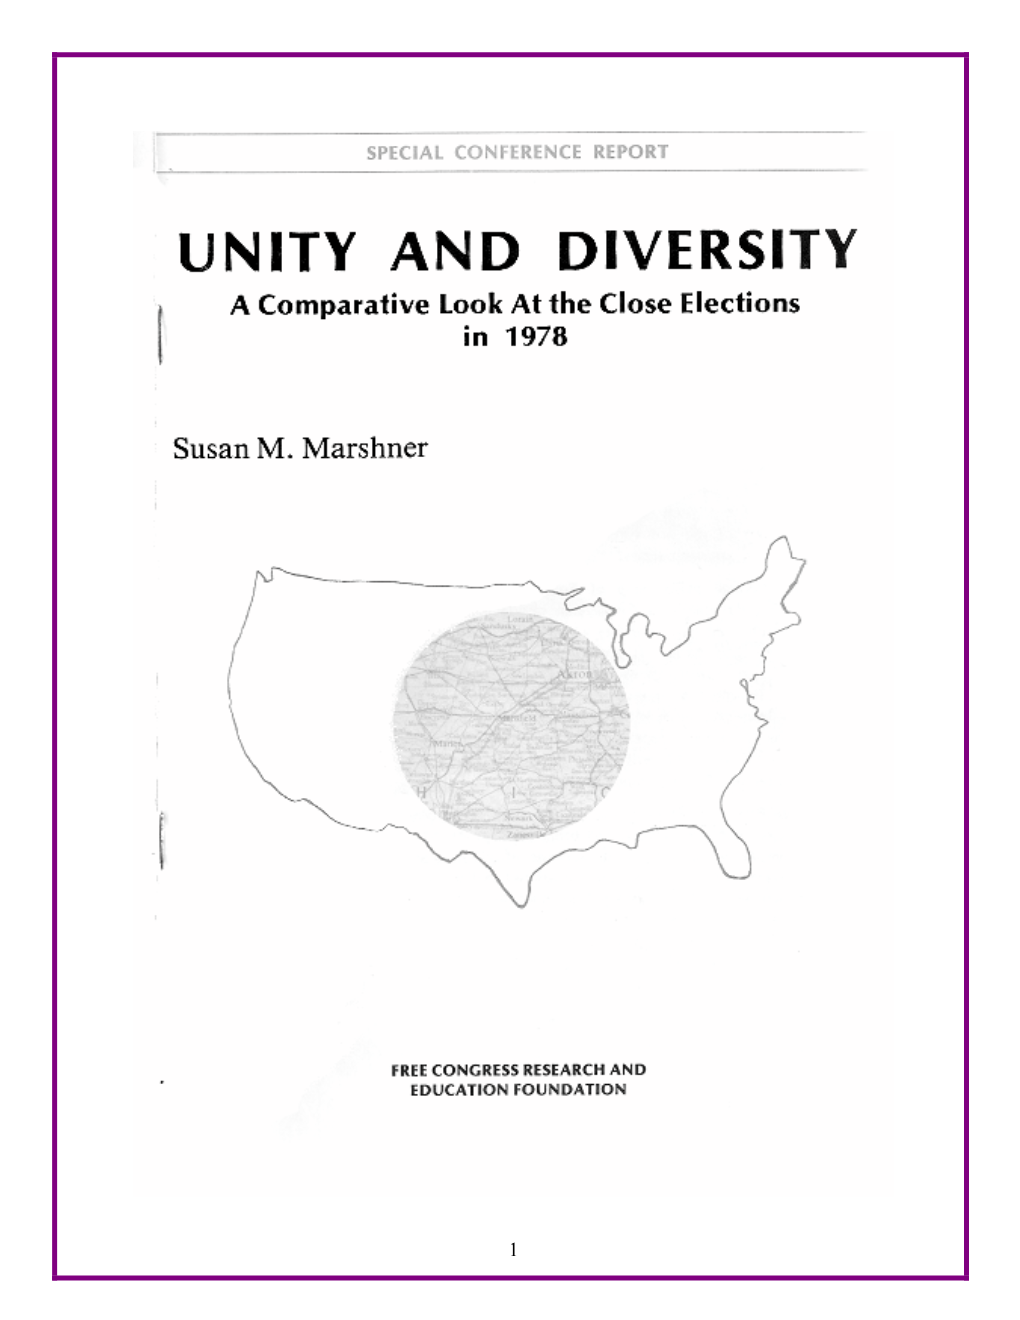 UNITY and DIVERSITY by Free Congress (1979)